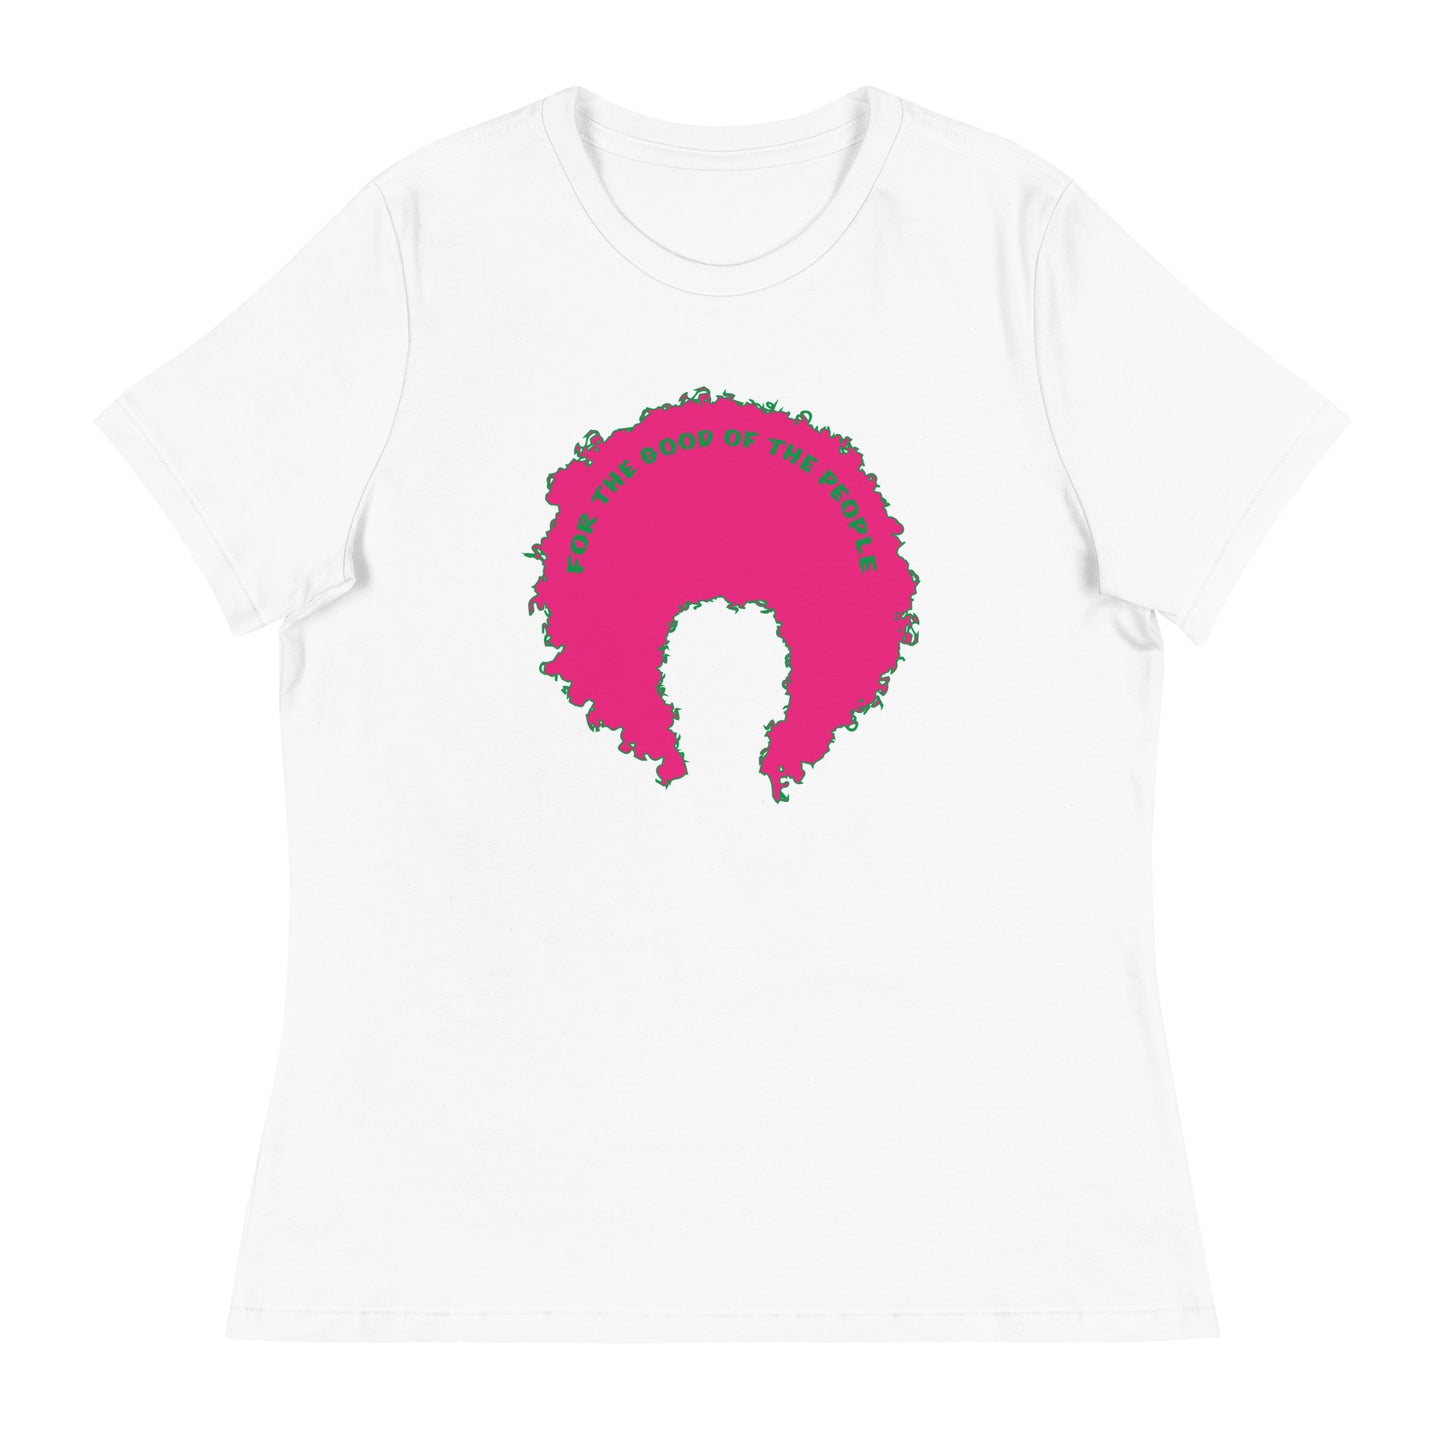 White women's tee with pink afro graphic trimmed in green with for the good of the people in green on the inside top of the afro.